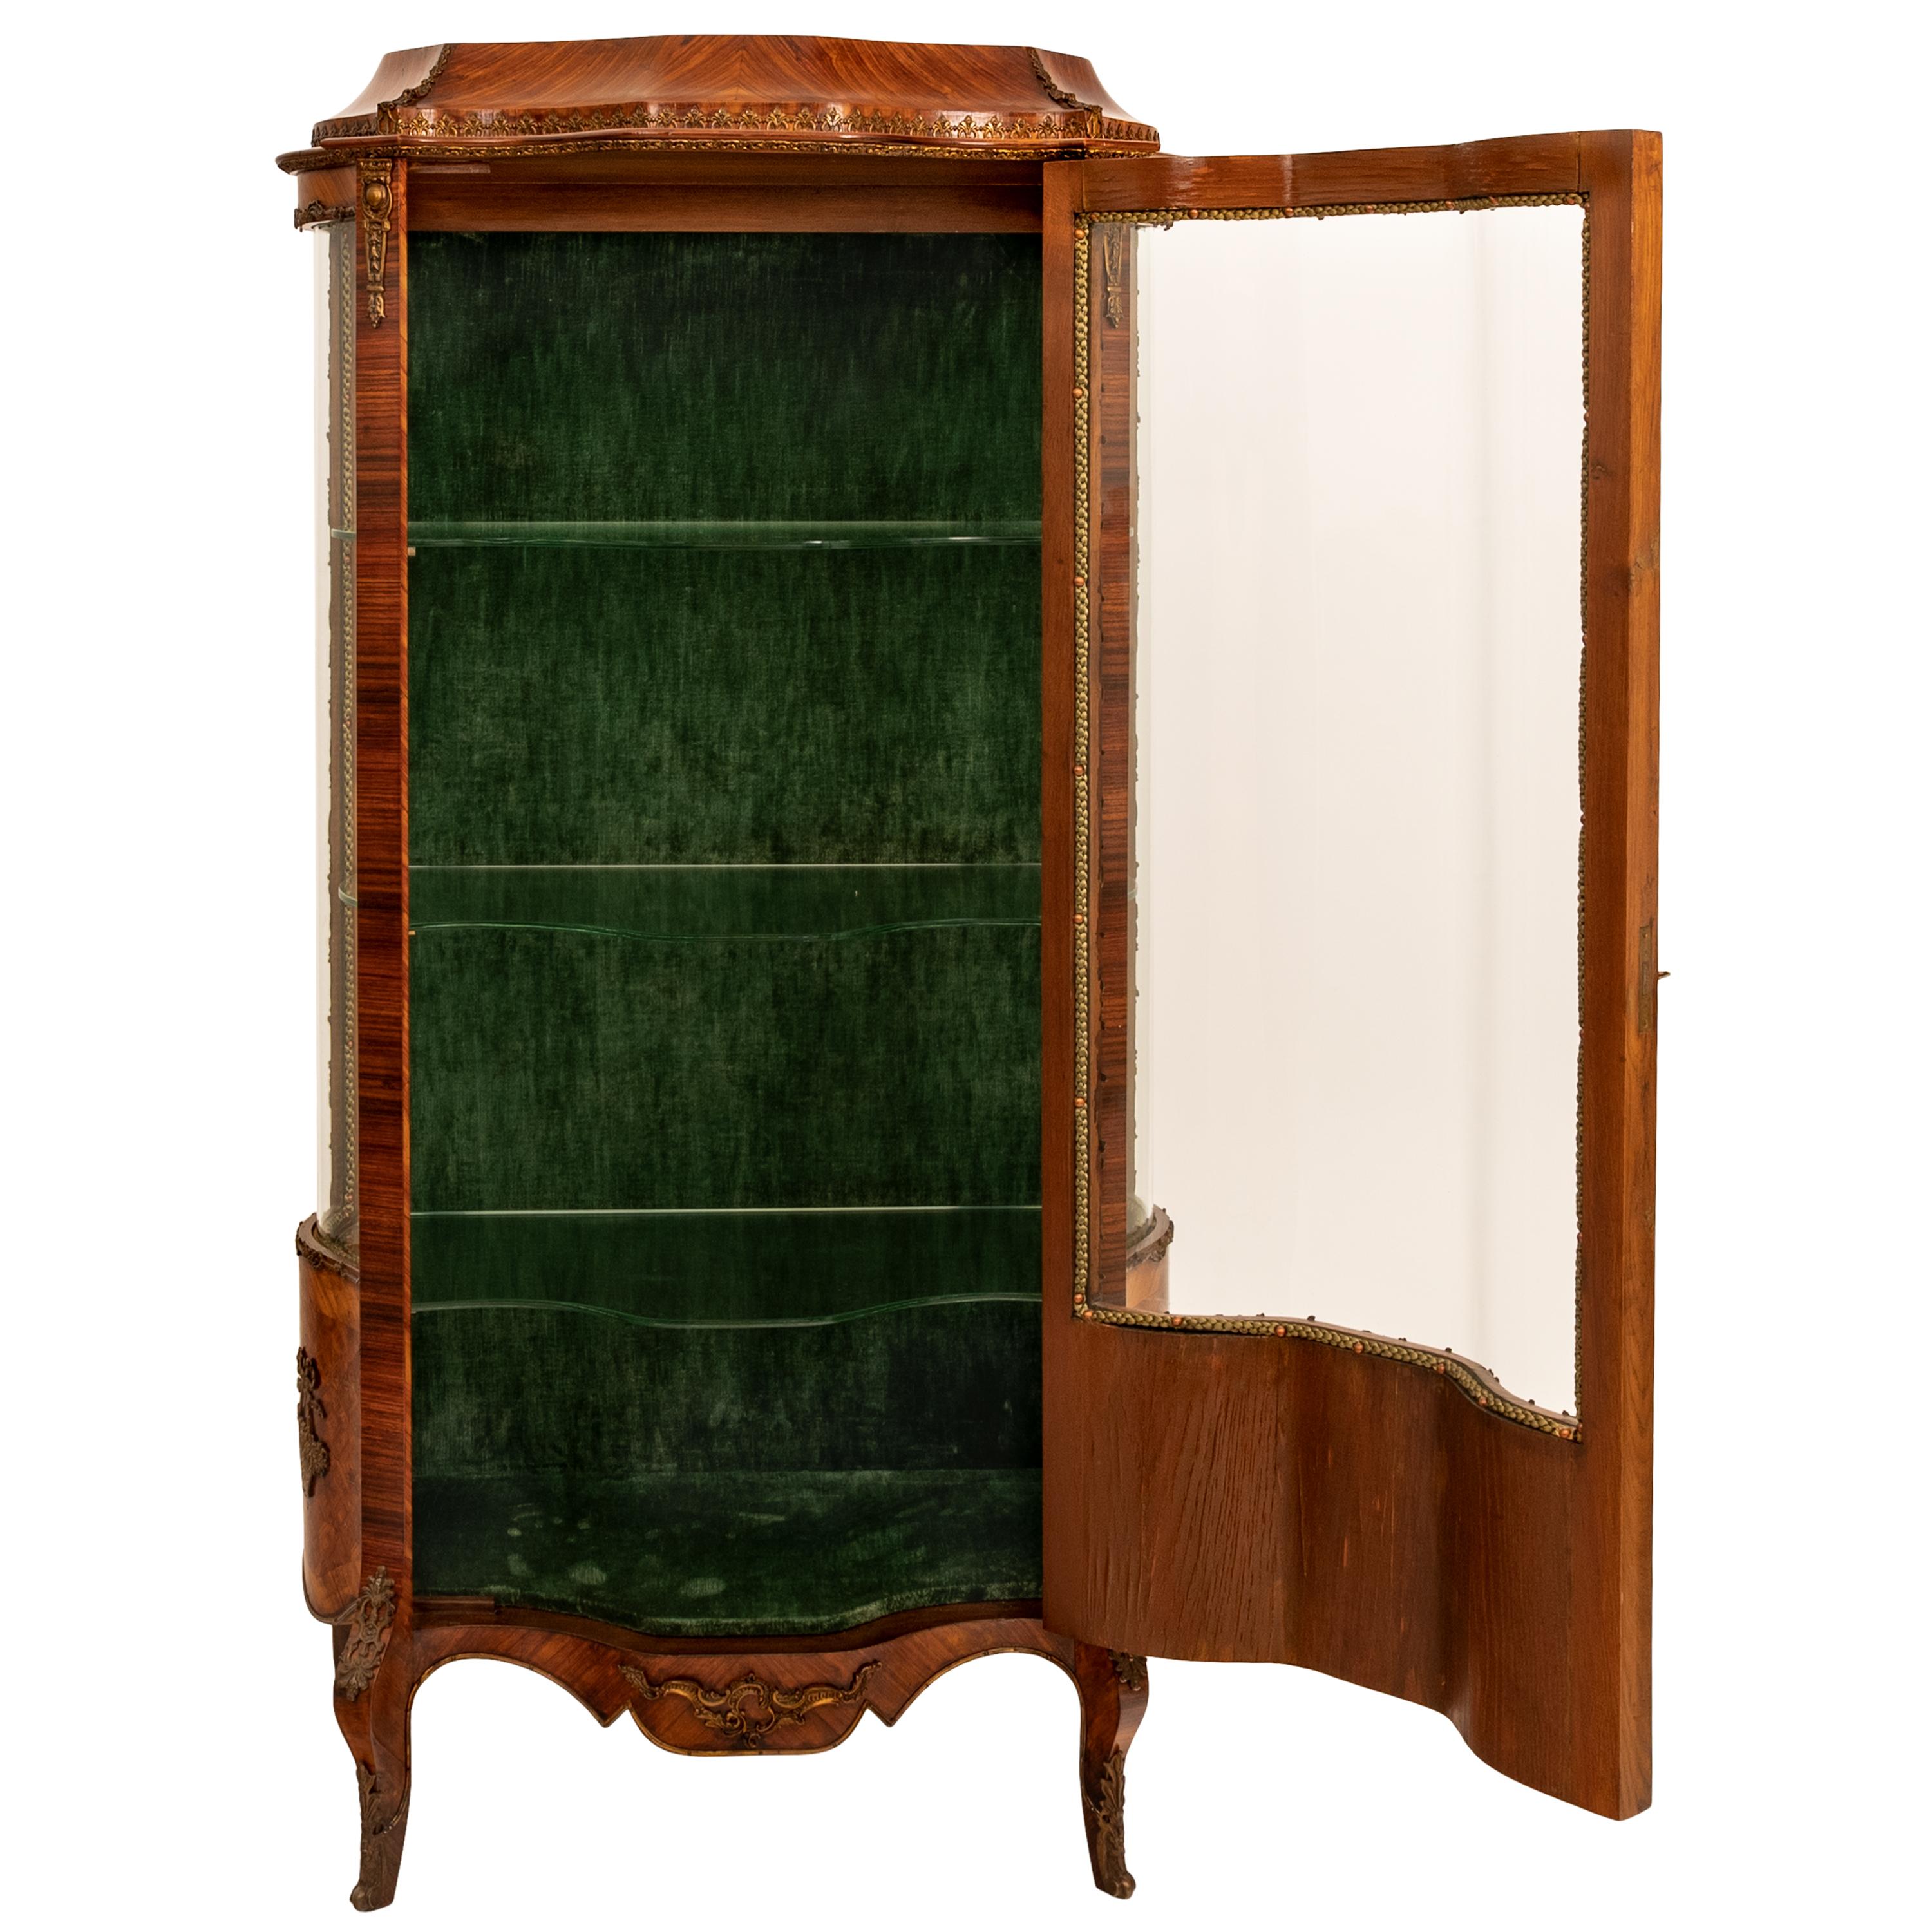 Fine Antique French Louis XV Kingwood Ormolu Bombe Shaped Marquetry Vitrine 1880 For Sale 5